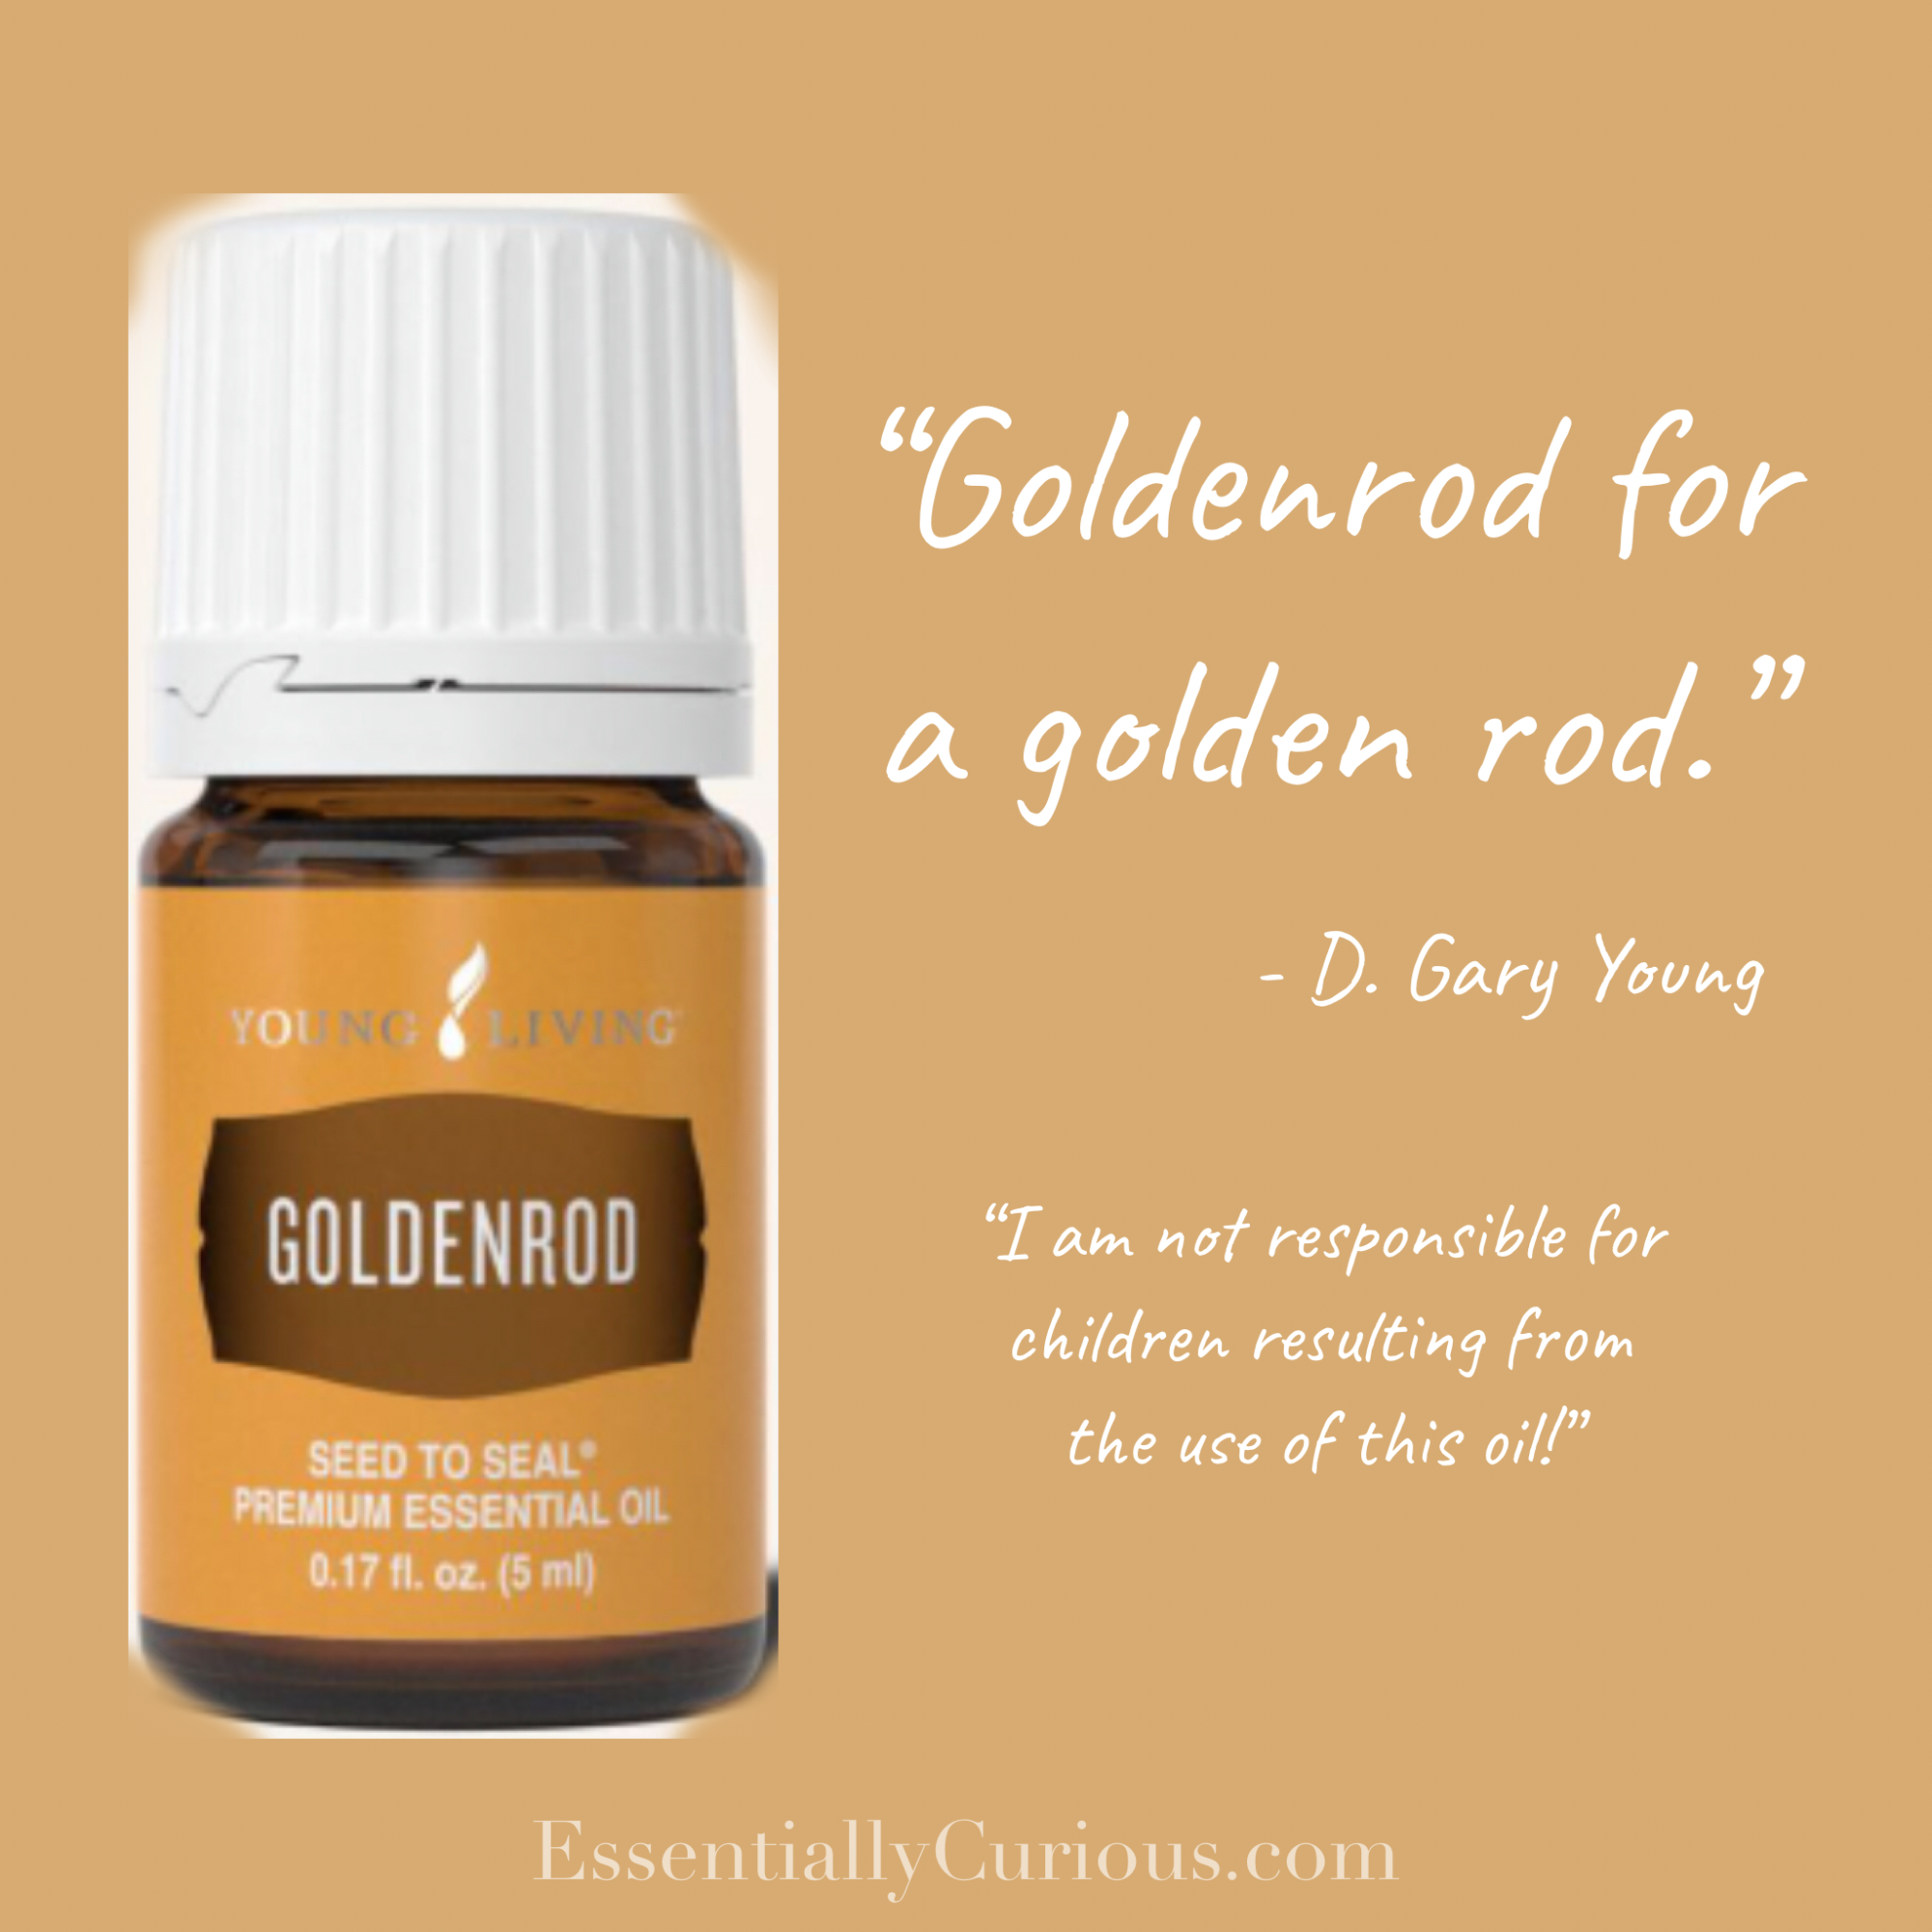 Goldenrod for a golden rod. D. Gary Young. I am not responsible for children resulting from the use of this oil. Image of Goldenrod essential oil